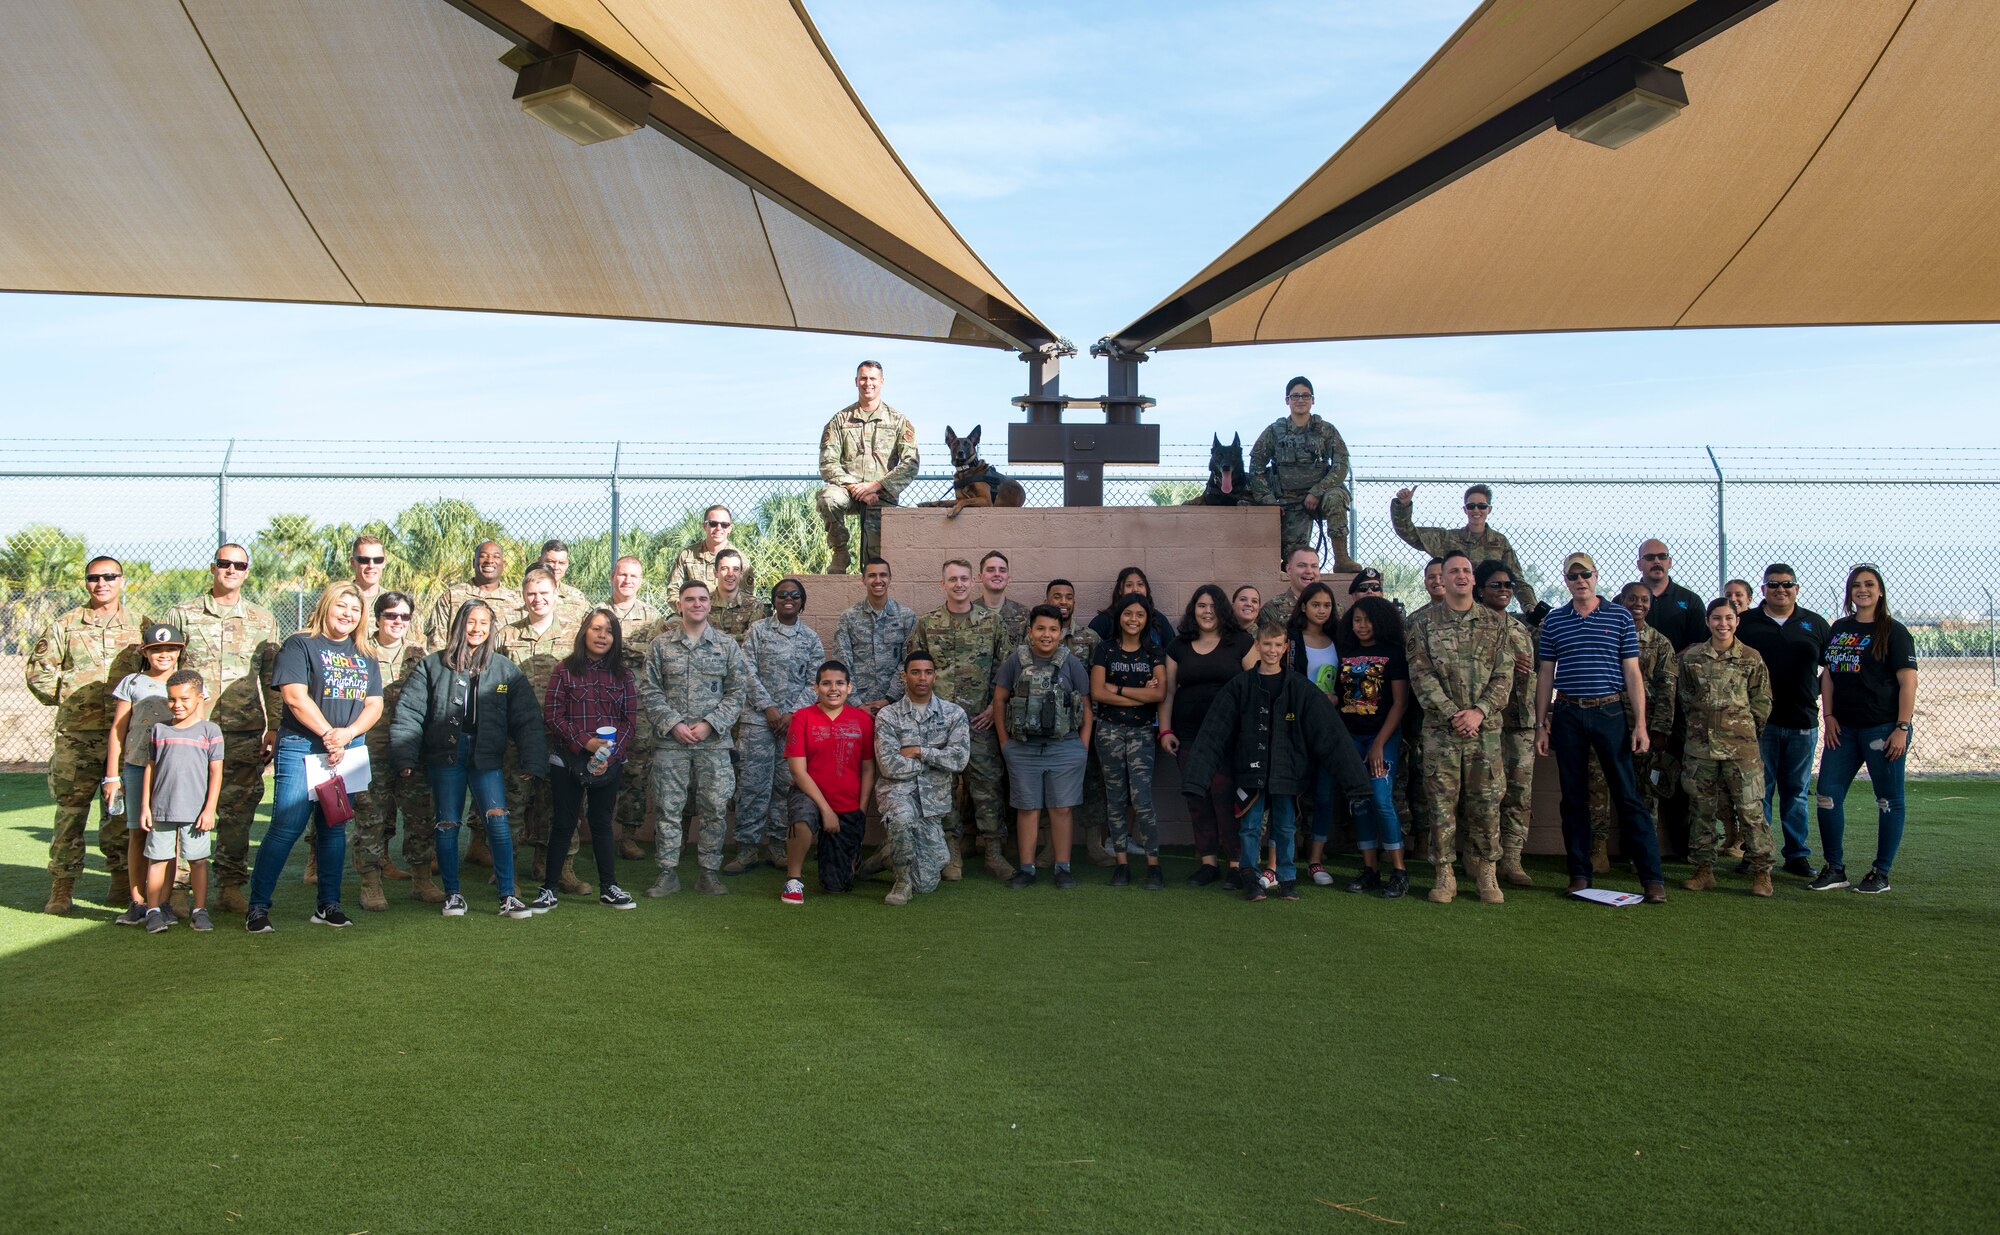 Airmen from the 56th Security Forces Squadron and members from the Childhelp program pose for a group photo during the Childhelp Kids Day of Hope tour Oct. 16, 2019, at Luke Air Force Base, Ariz.